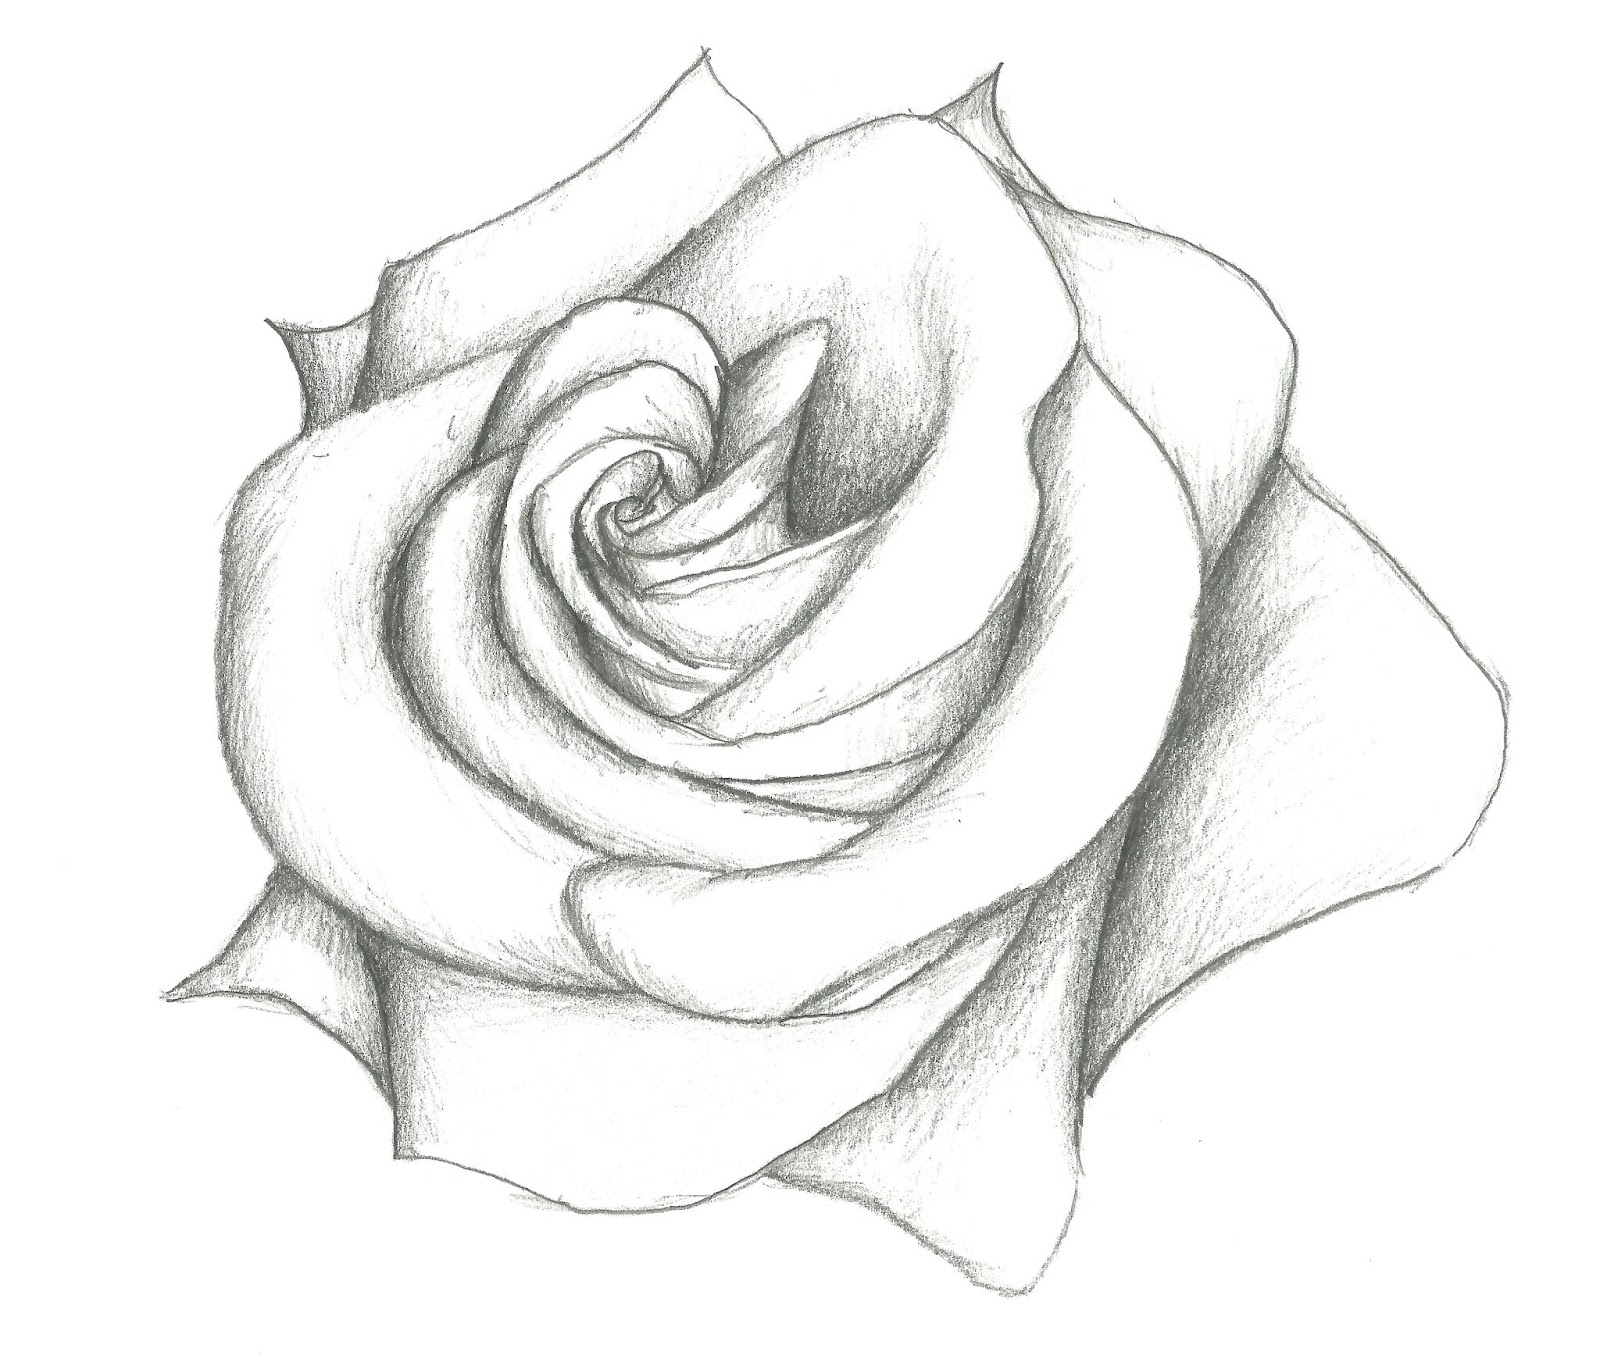 Simple Flower Designs For Pencil Drawing Step By Step : Simple and easy